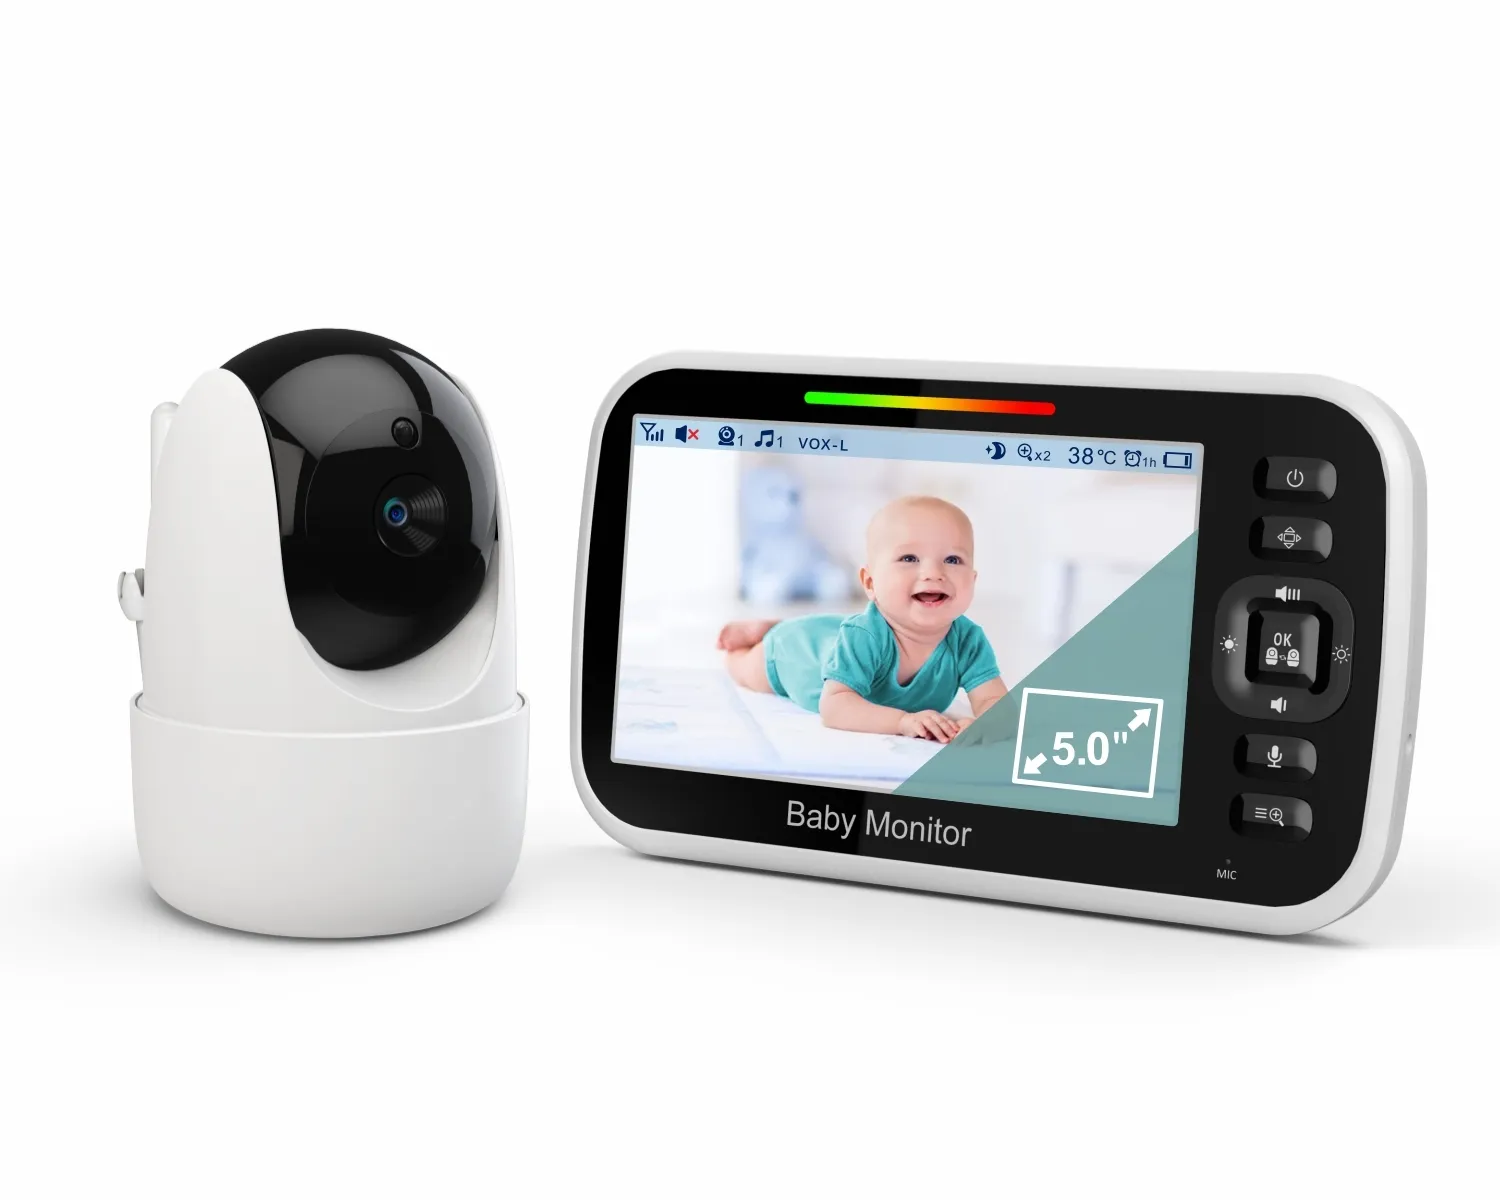 5" LCD Display Screen Battery Energy Storage Digital Wireless Video Baby Monitor Security Surveillance PTZ Camera SM651 Indoor